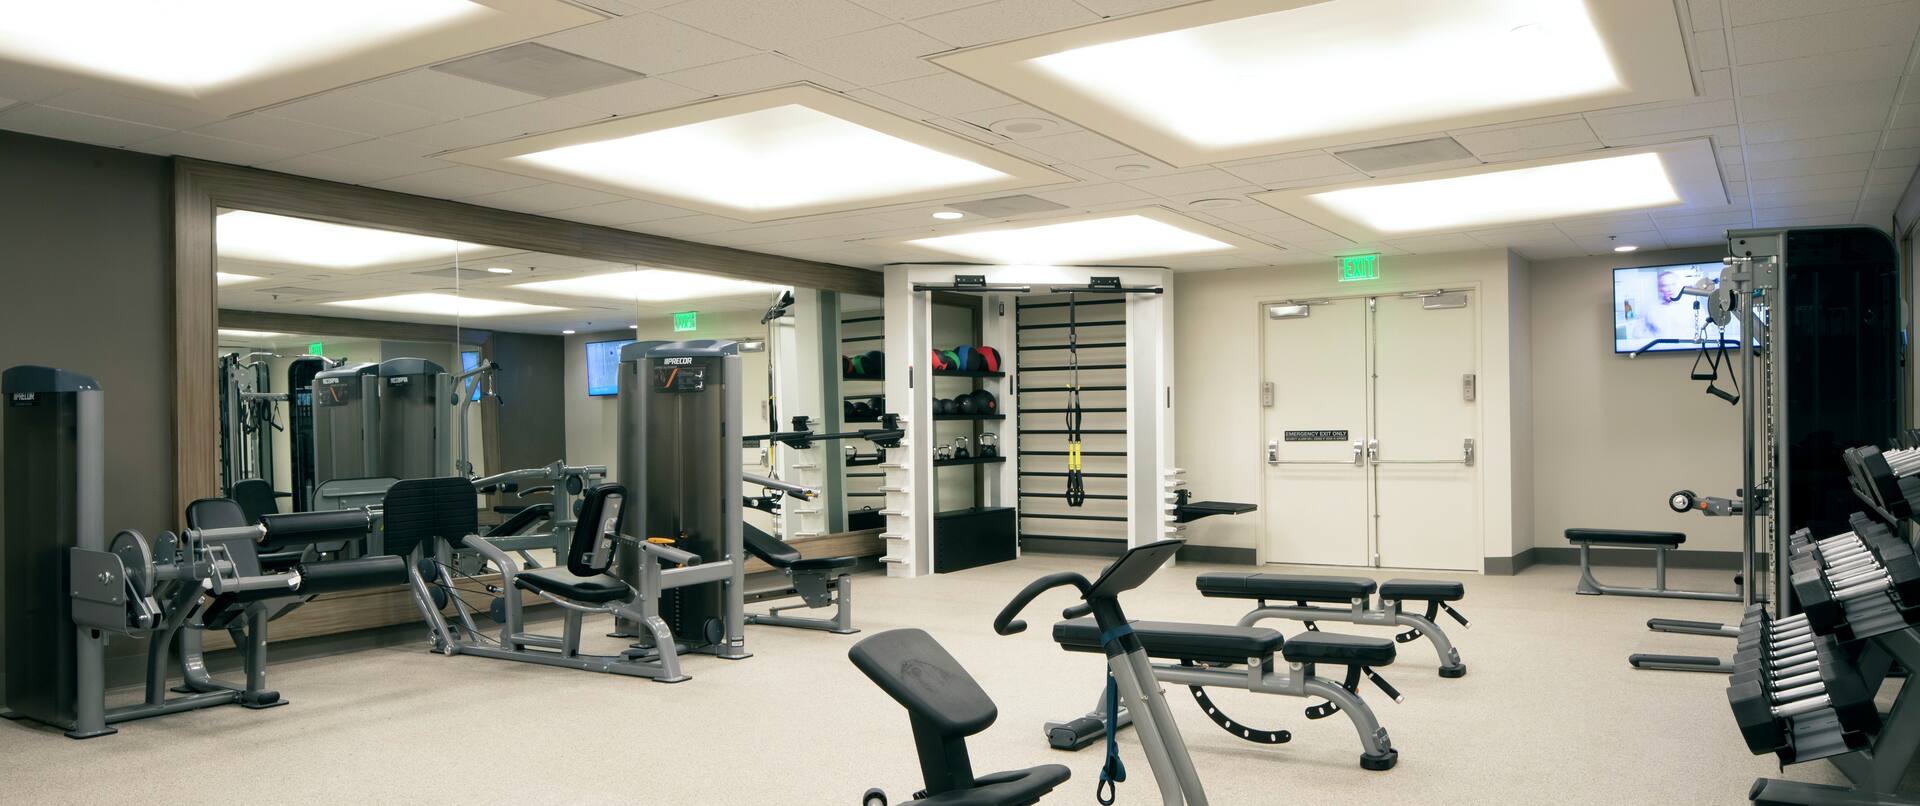 Fitness Center with Weights and Strength Equipment